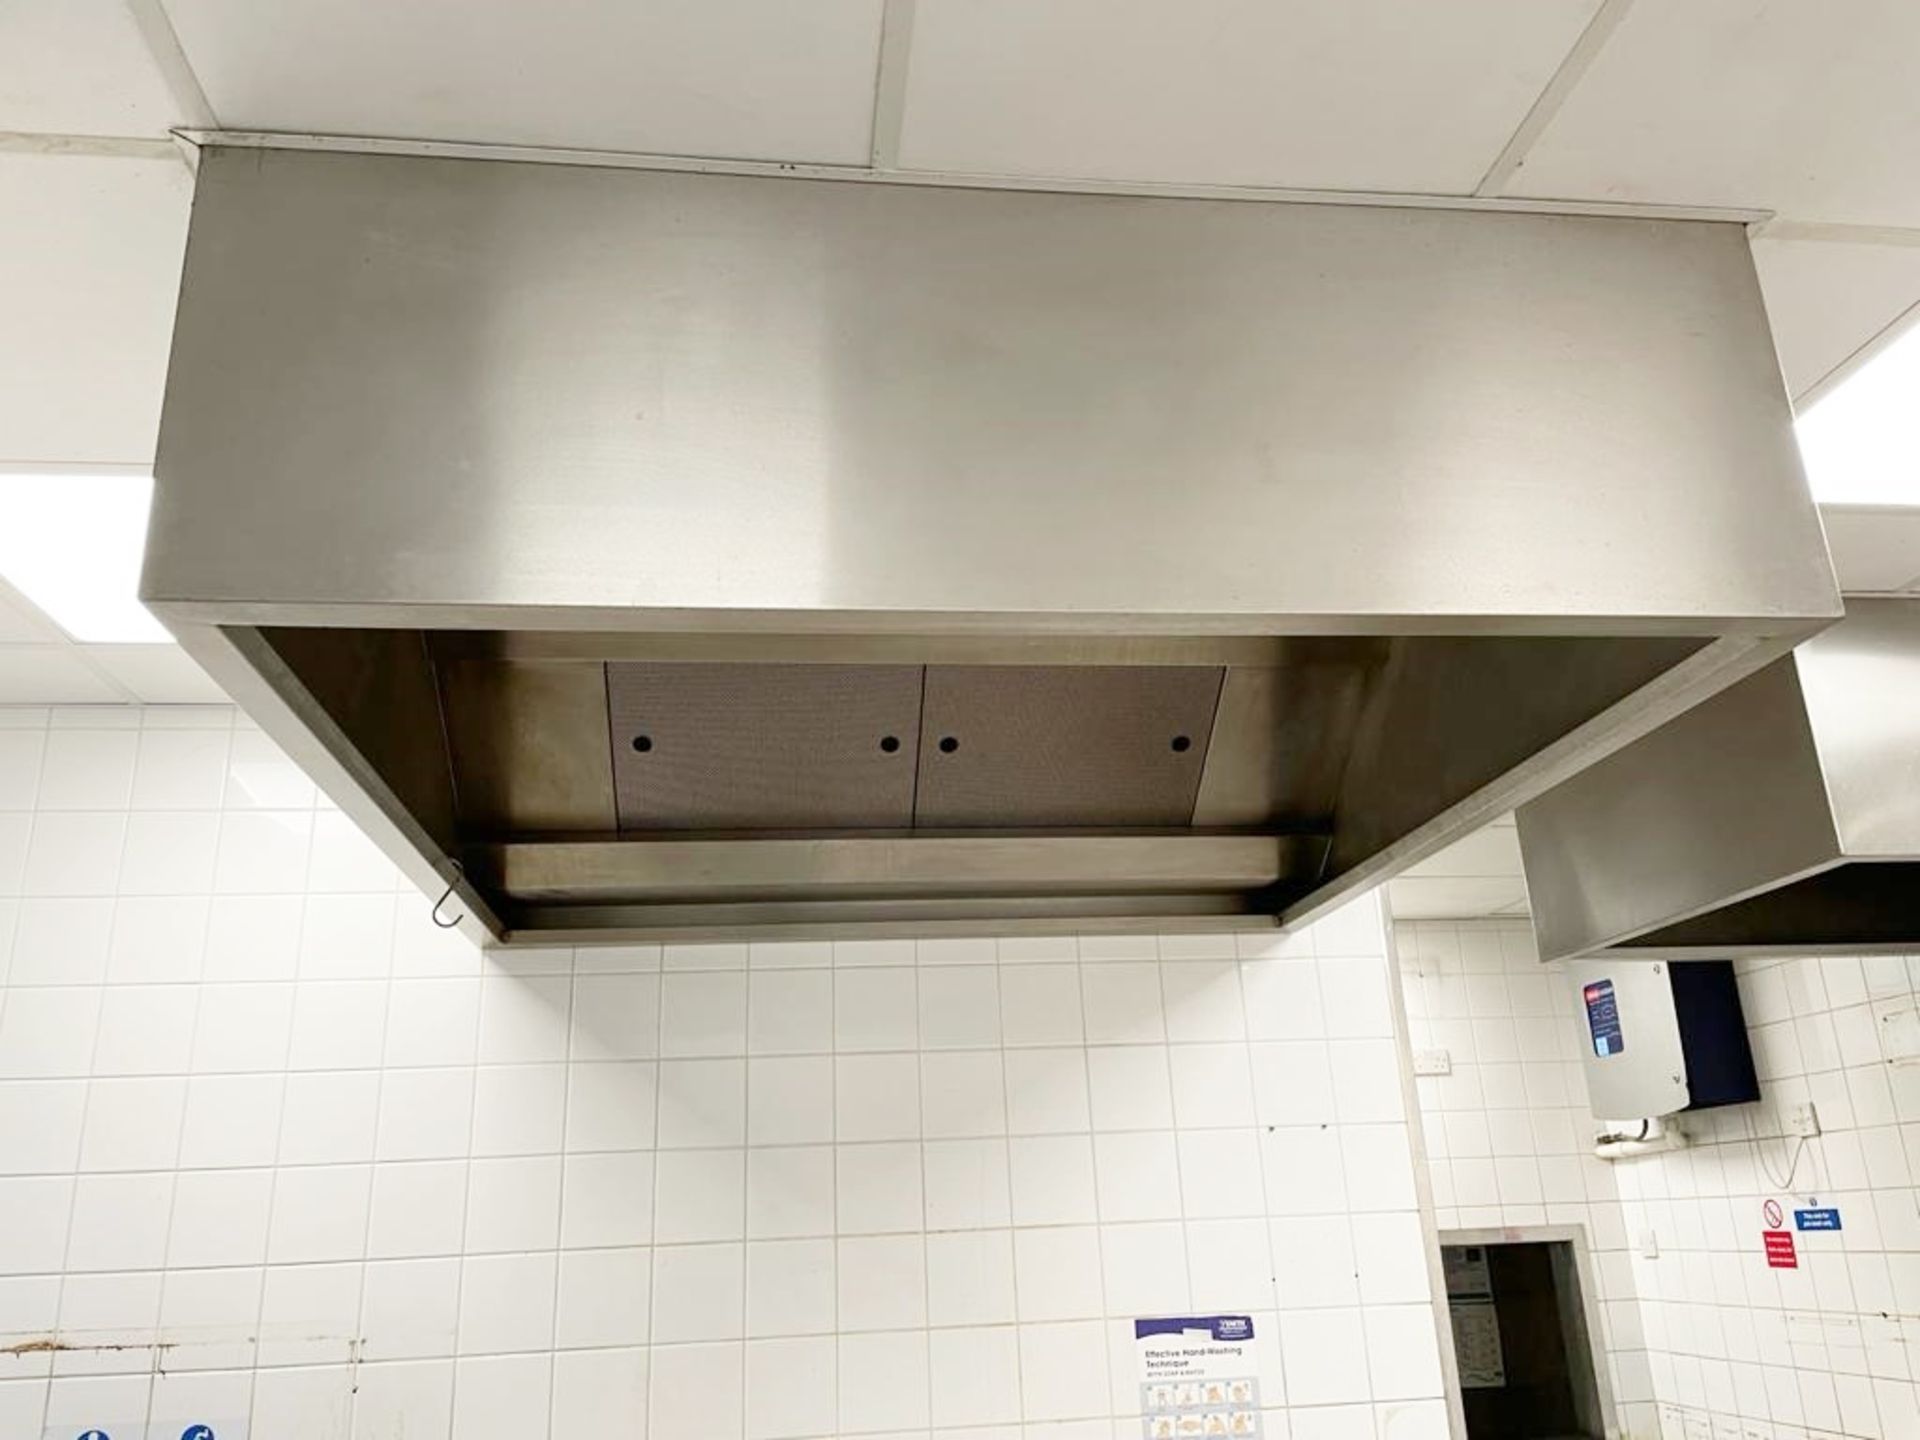 1 x Commercial Kitchen Extractor Canopy With Filters - Stainless Steel - Dimension: H50 x W150 x